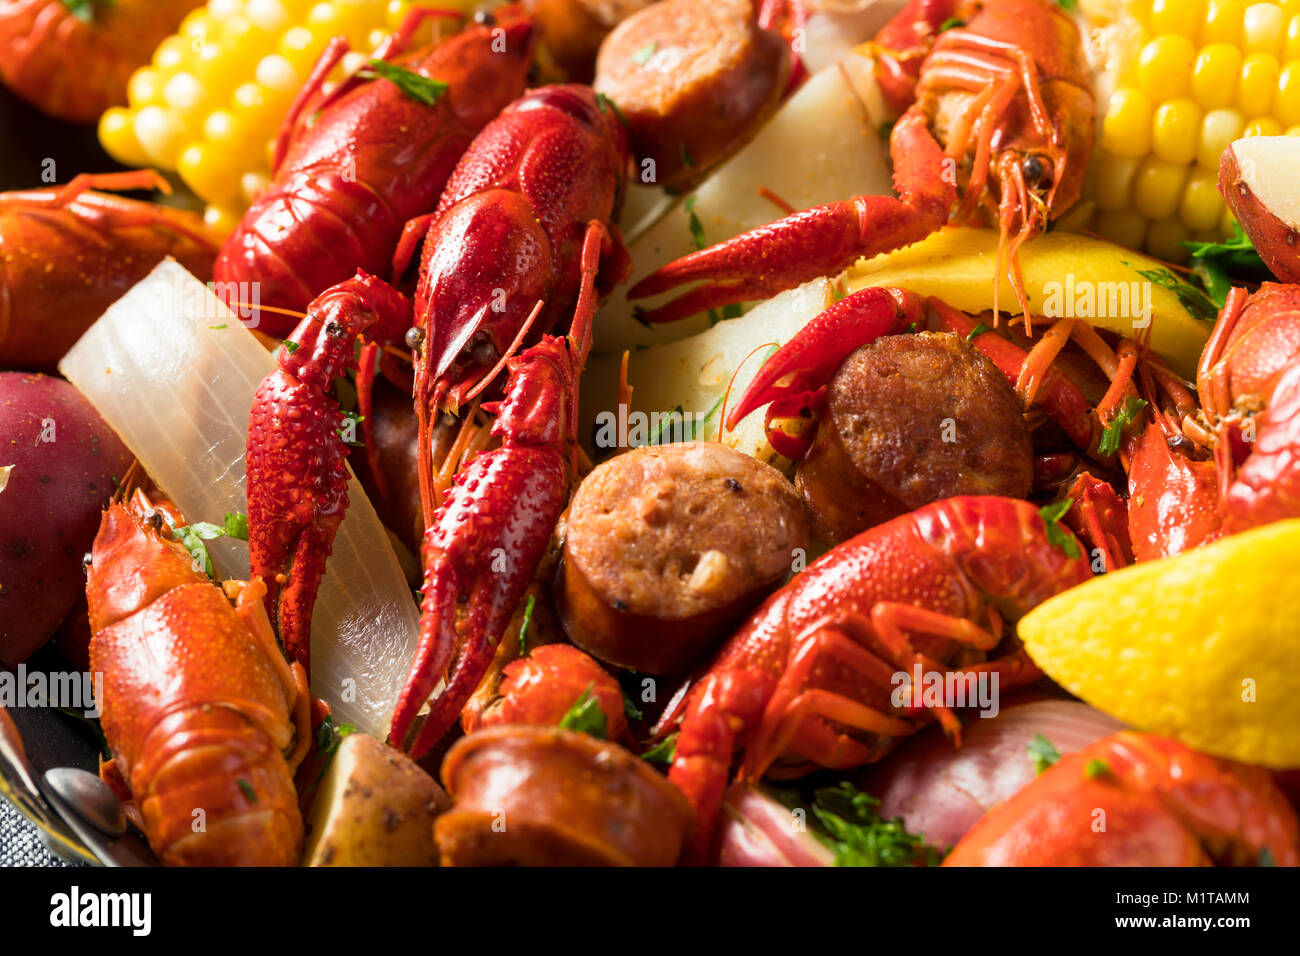 Homemade Southern Crawfish Boil with Potatoes Sausage and Corn Stock Photo